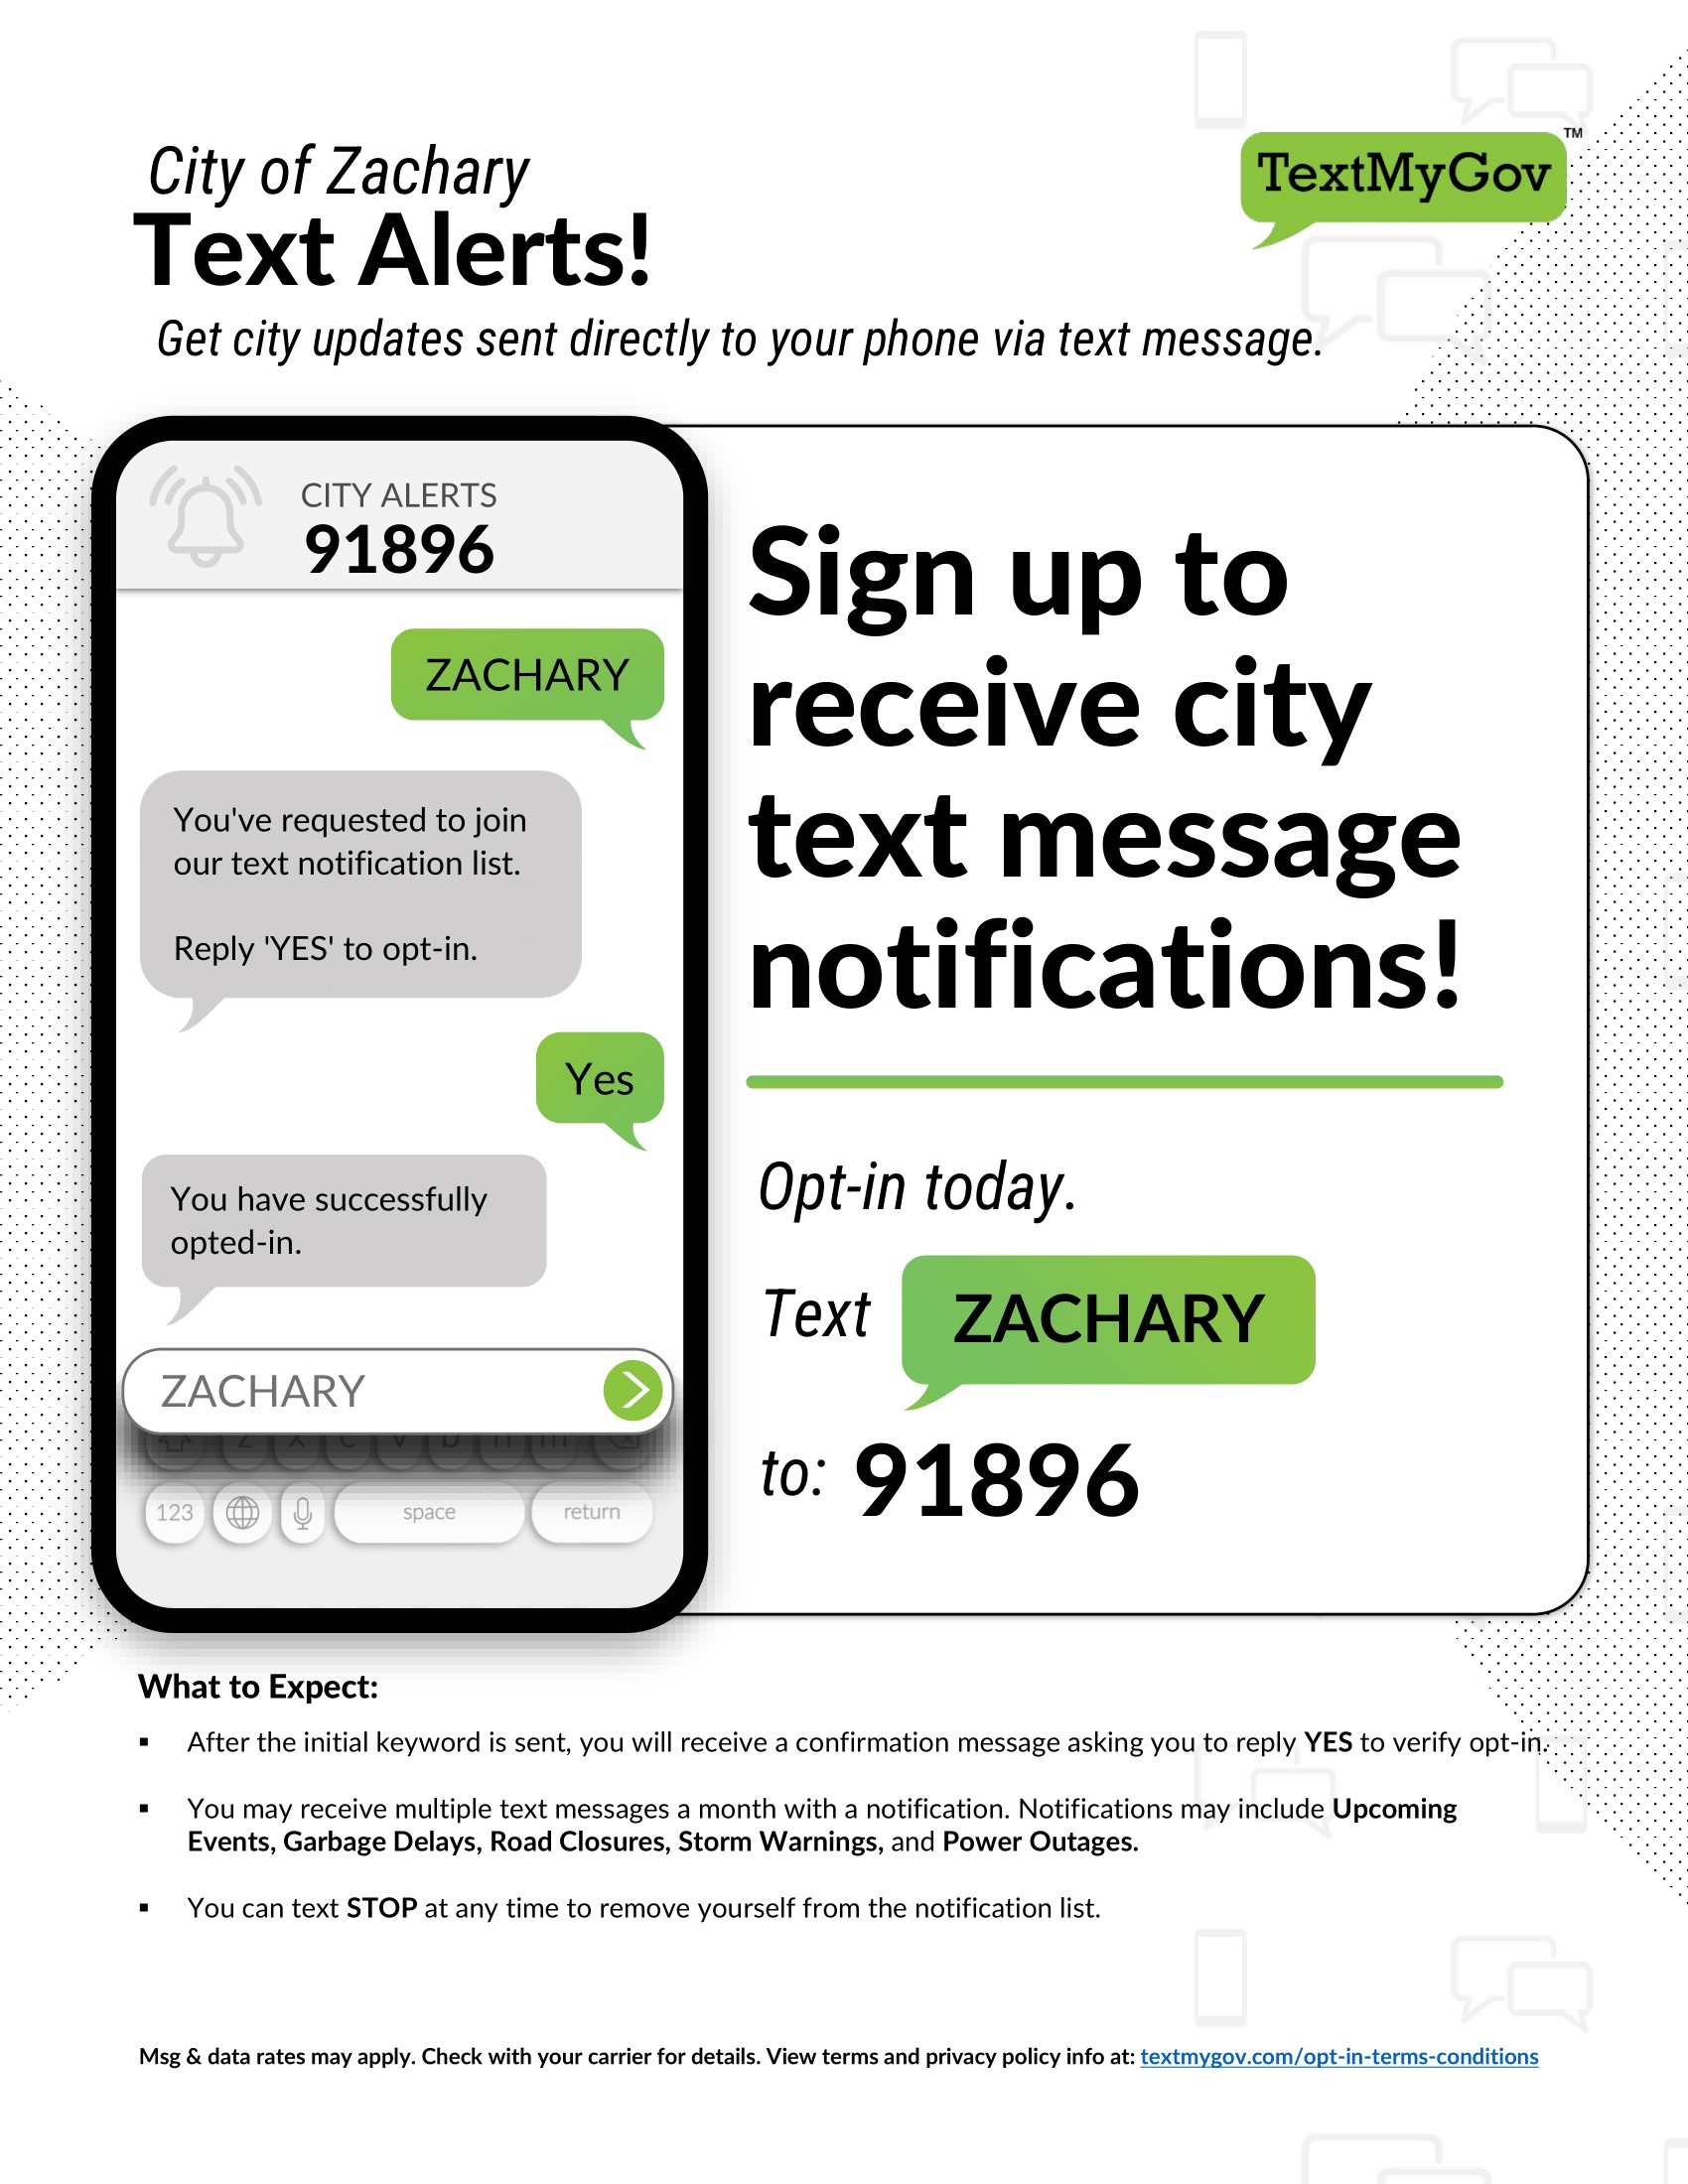 City of Zachary Launches TextMyGov New Text Alert and Text Messaging Service